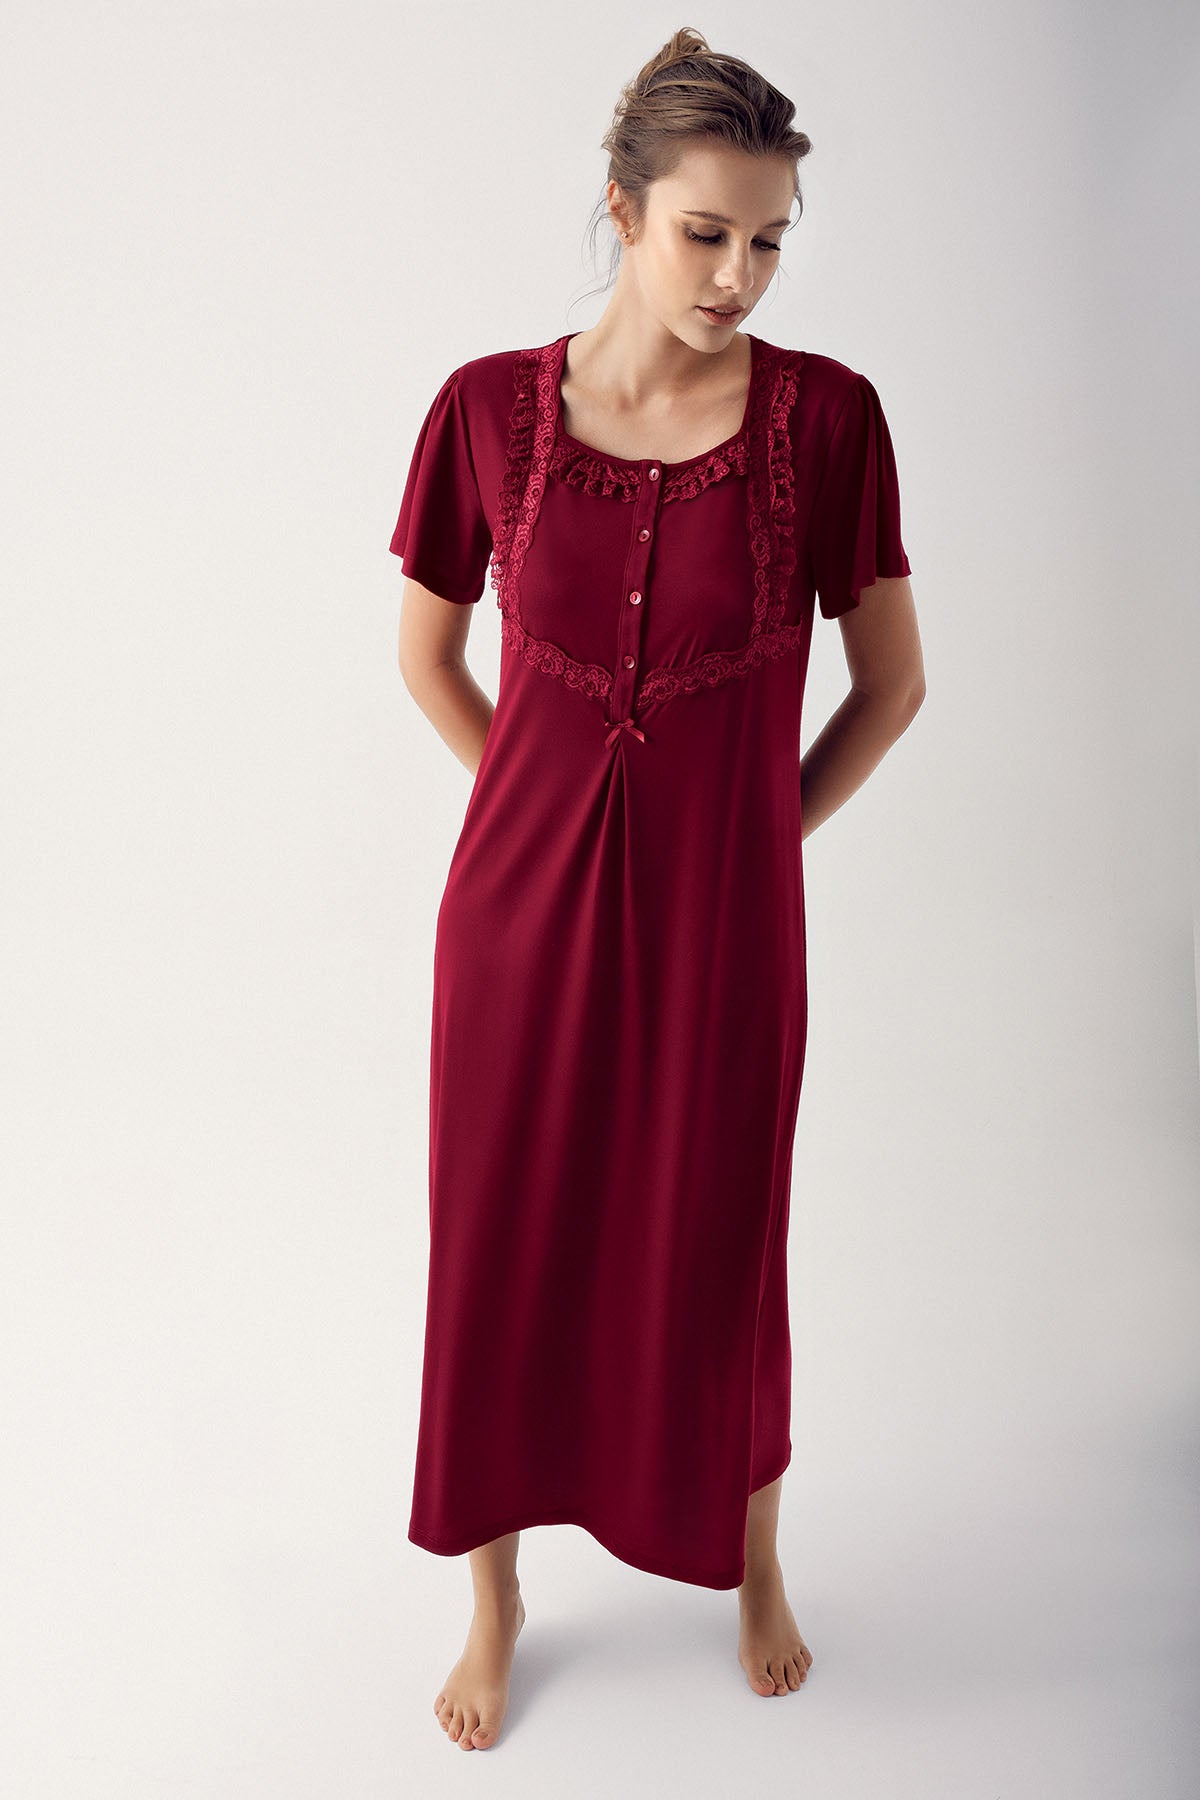 Shopymommy 14110 Square Collar Lace Plus Size Maternity & Nursing Nightgown Claret Red